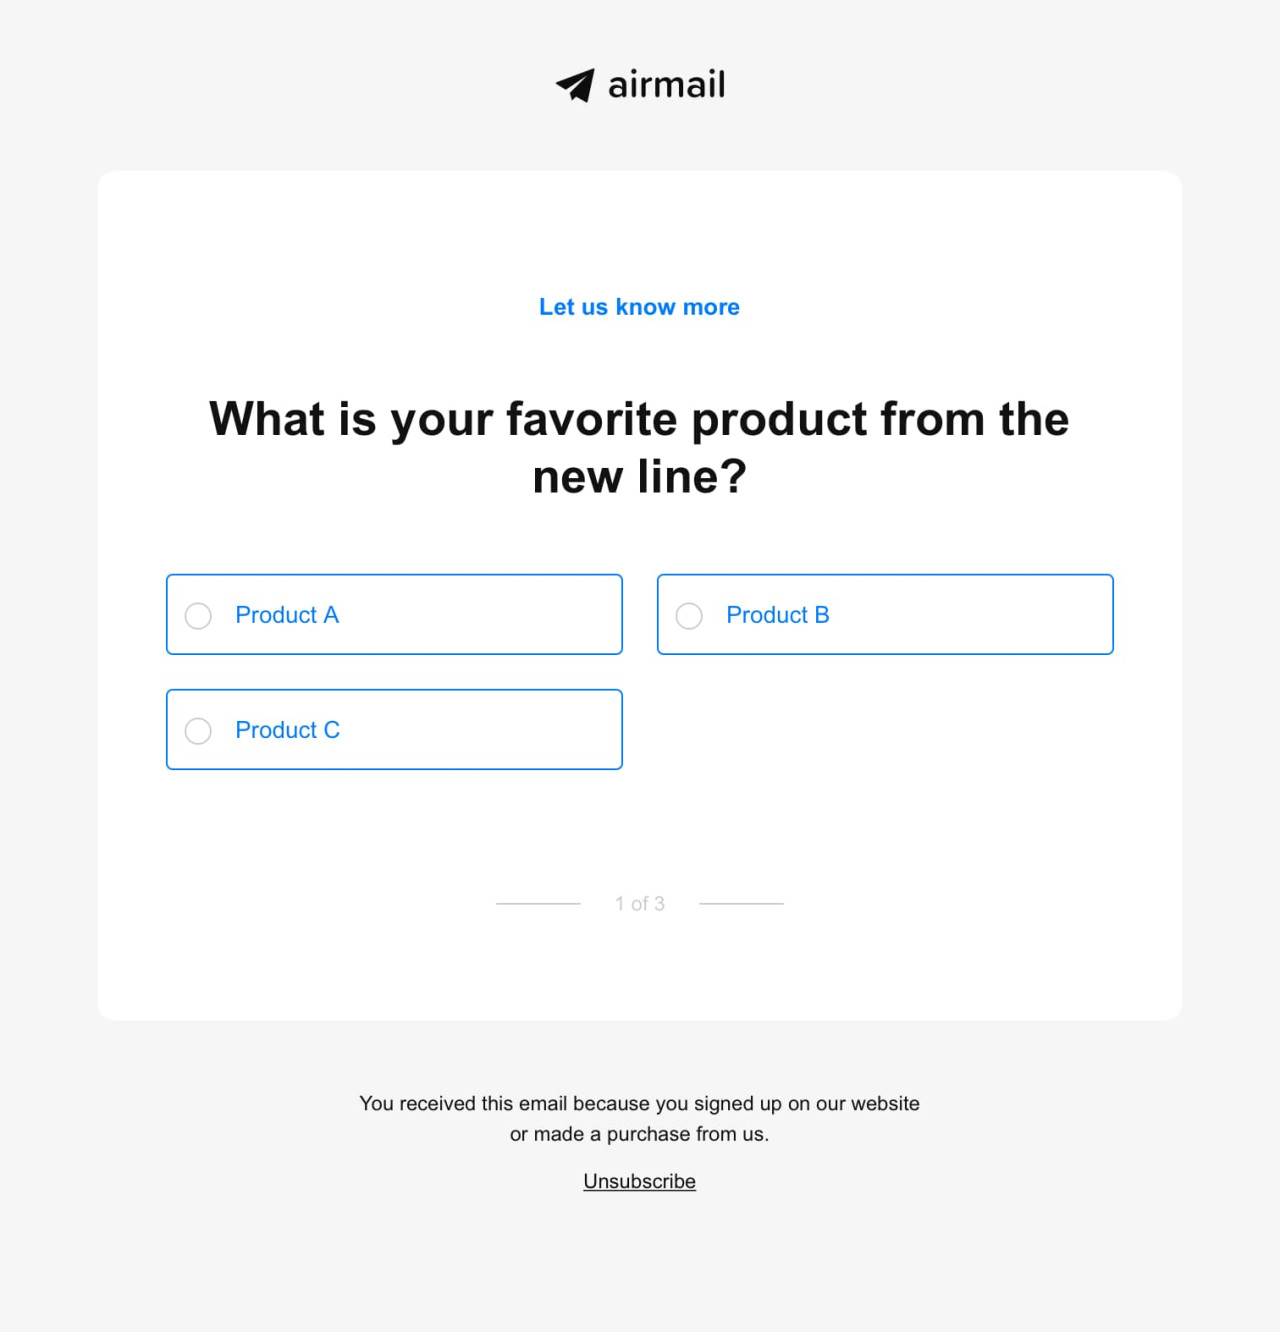 Multiple choice survey email template - Made by MailerLite